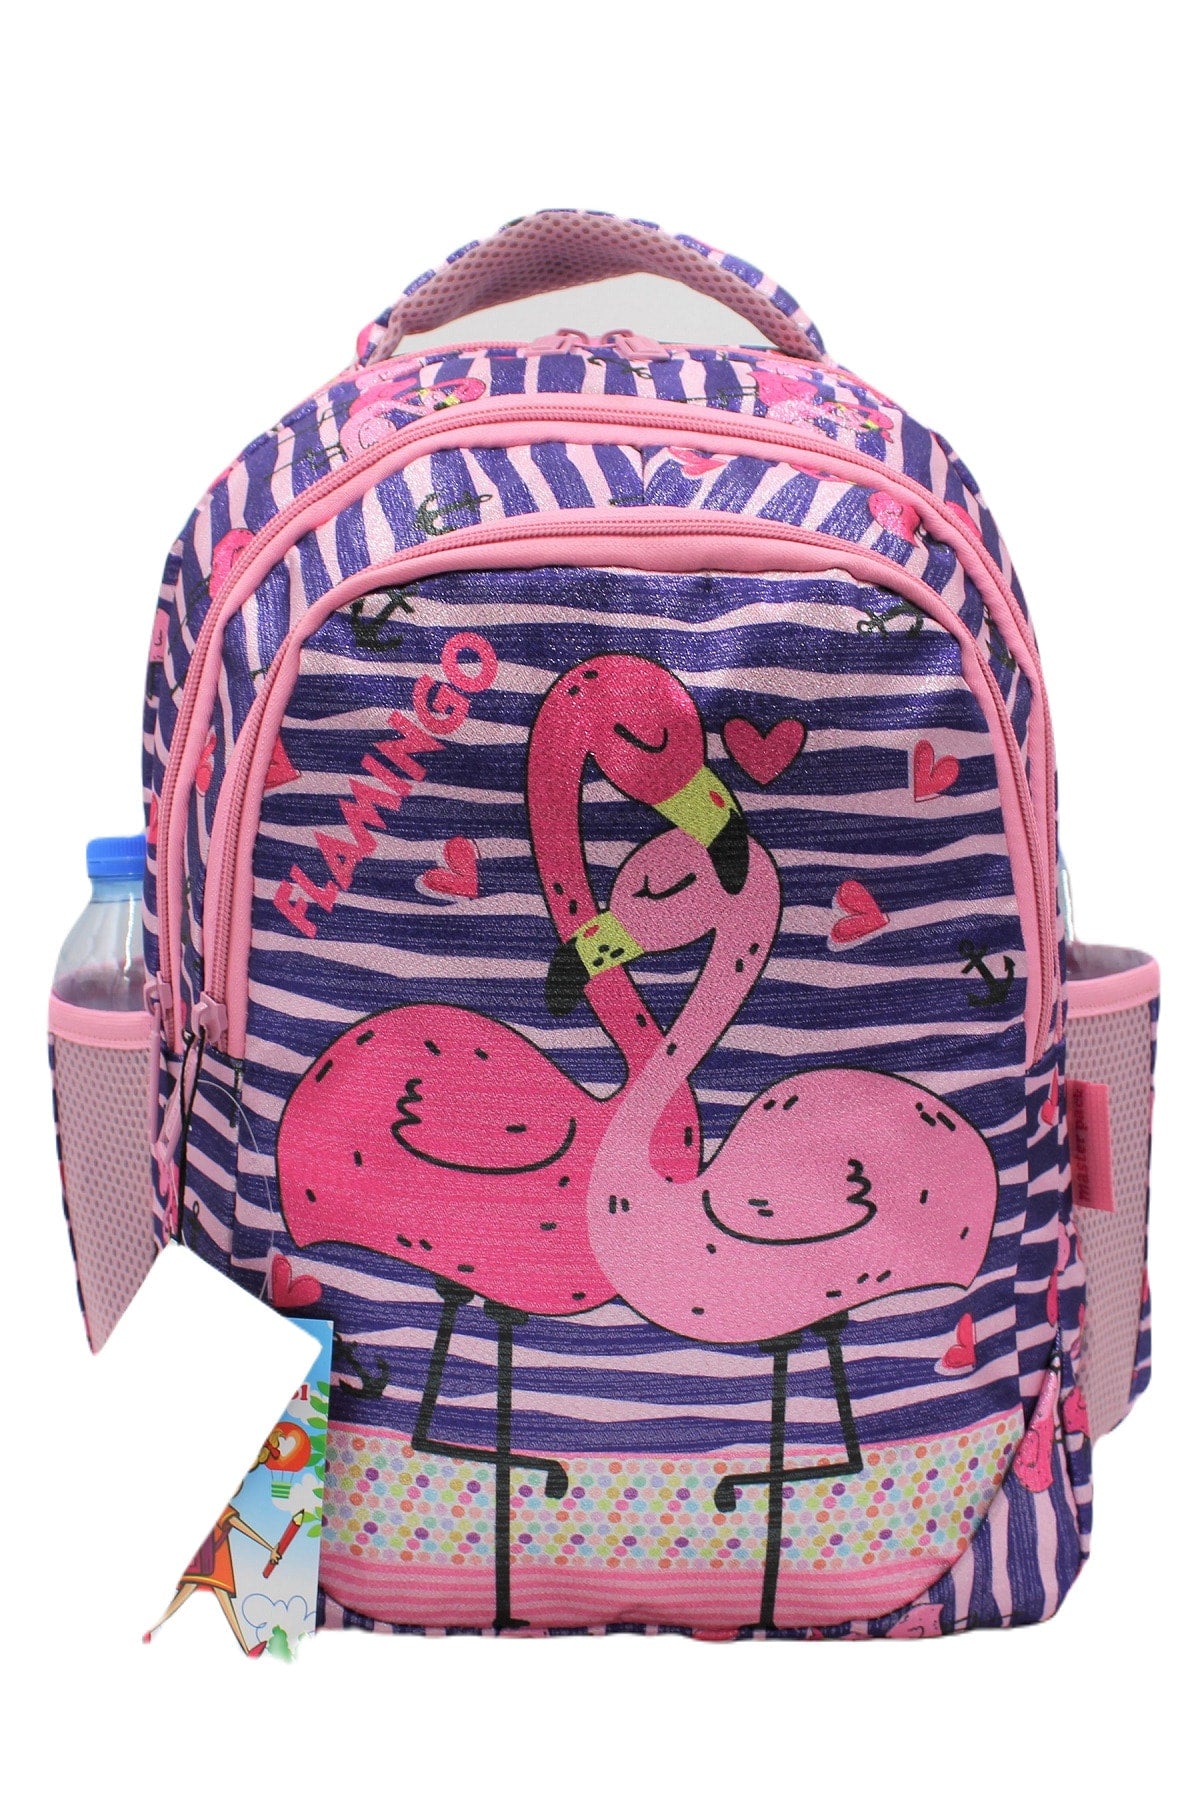 Sim Flamingo Patterned Dark Purple Color Girl Backpack Primary School Bag Set with Lunch Box and Pencil Holder